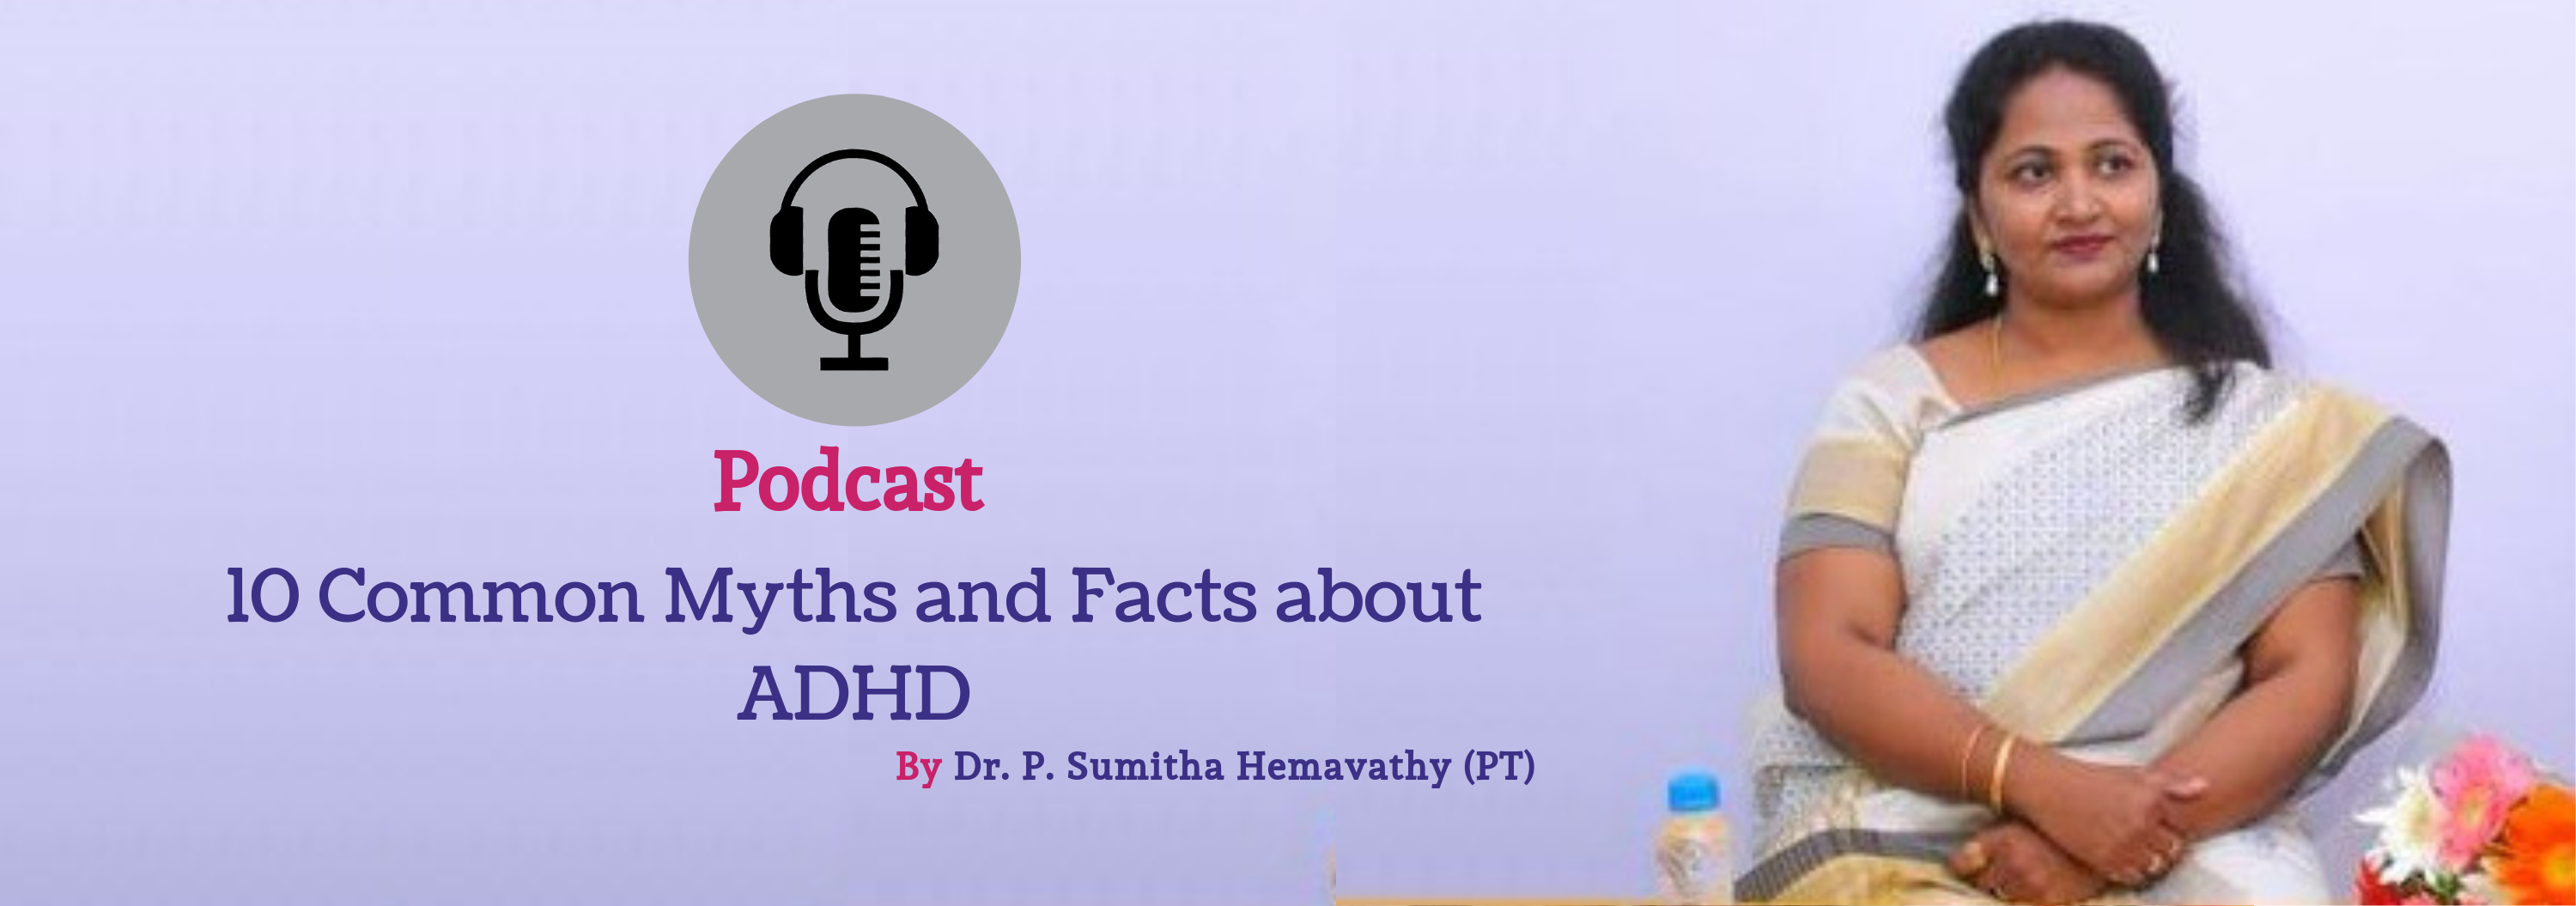 10 Common Myths and Facts about ADHD